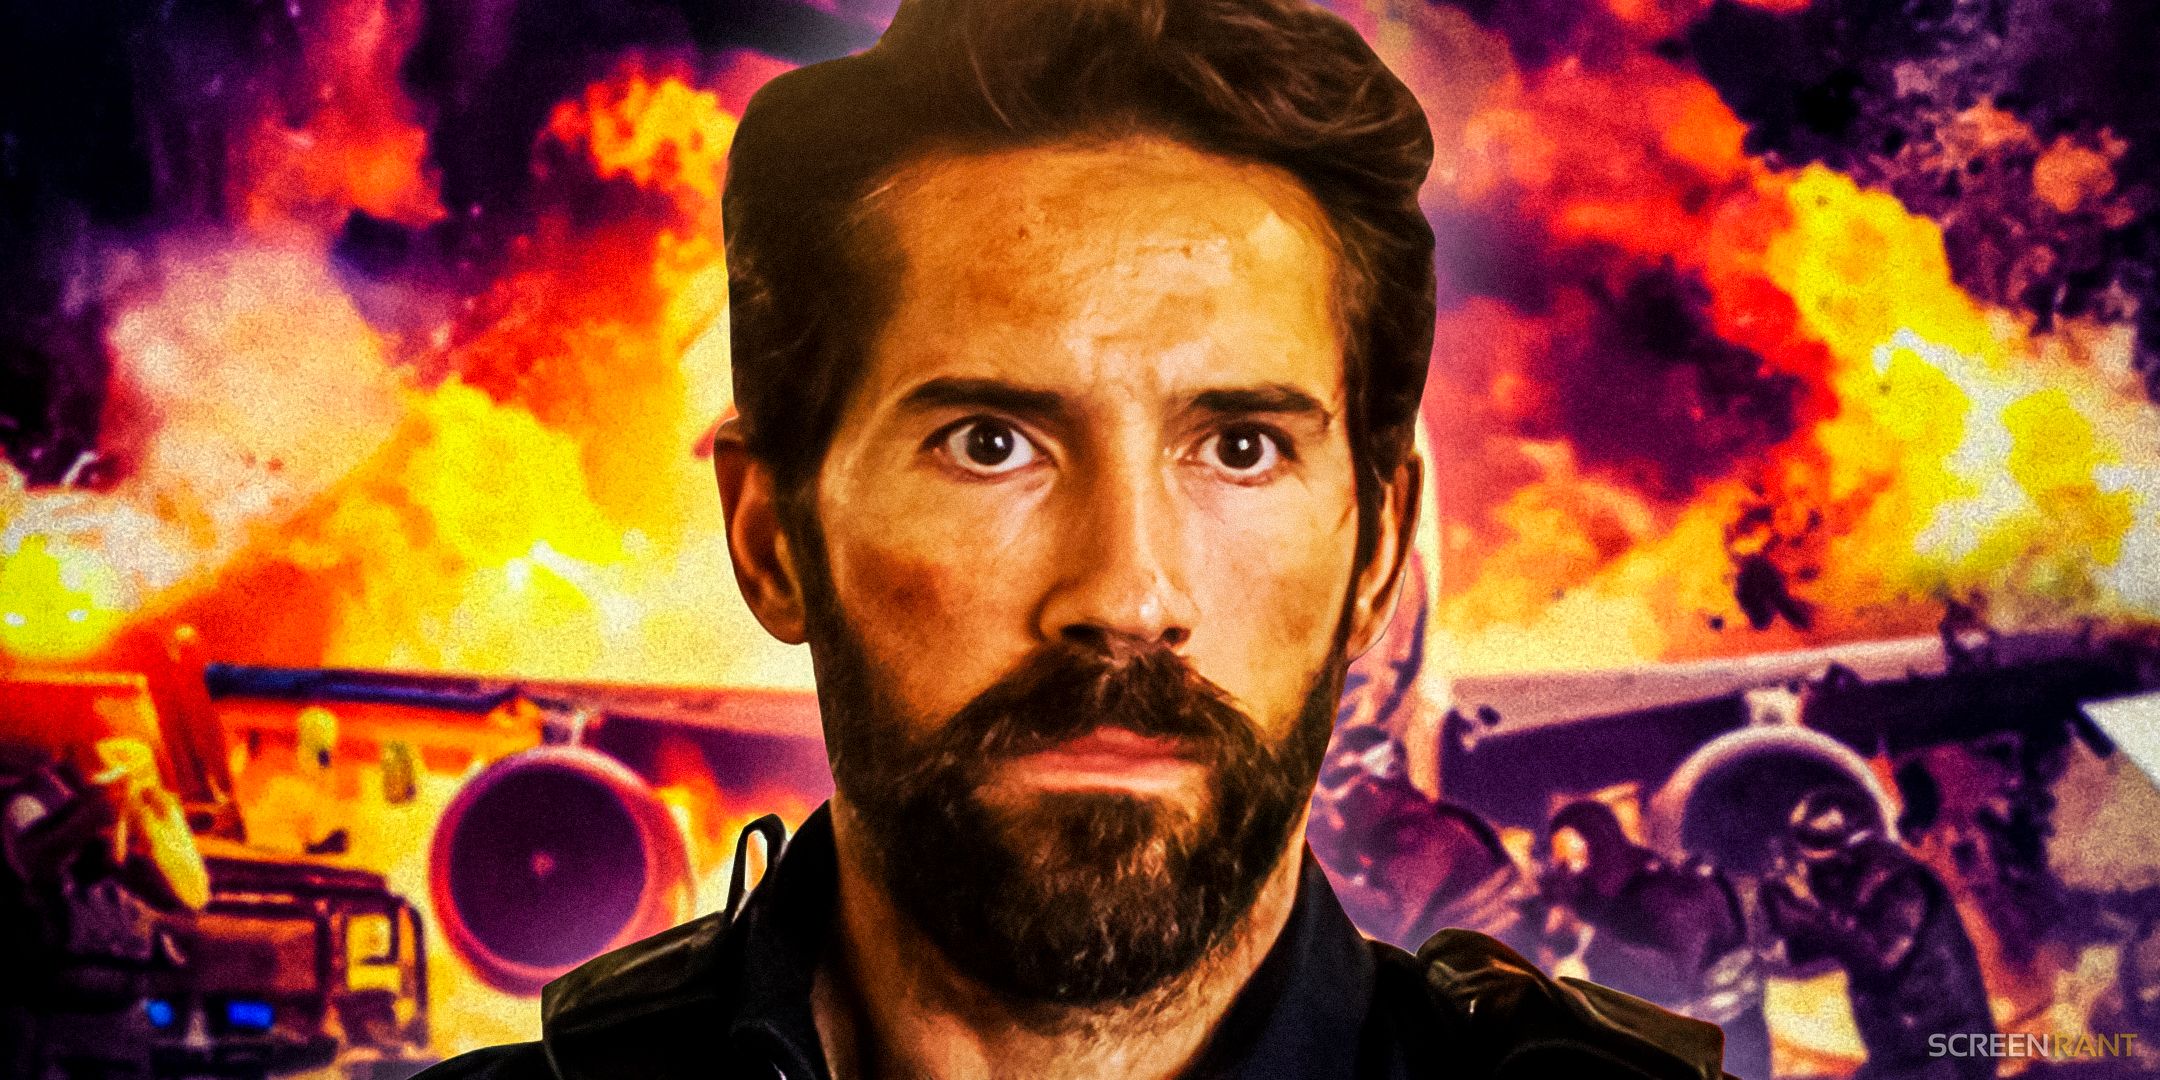 Scott Adkins as Harris from One Last Shot against the backdrop of an exploding plane